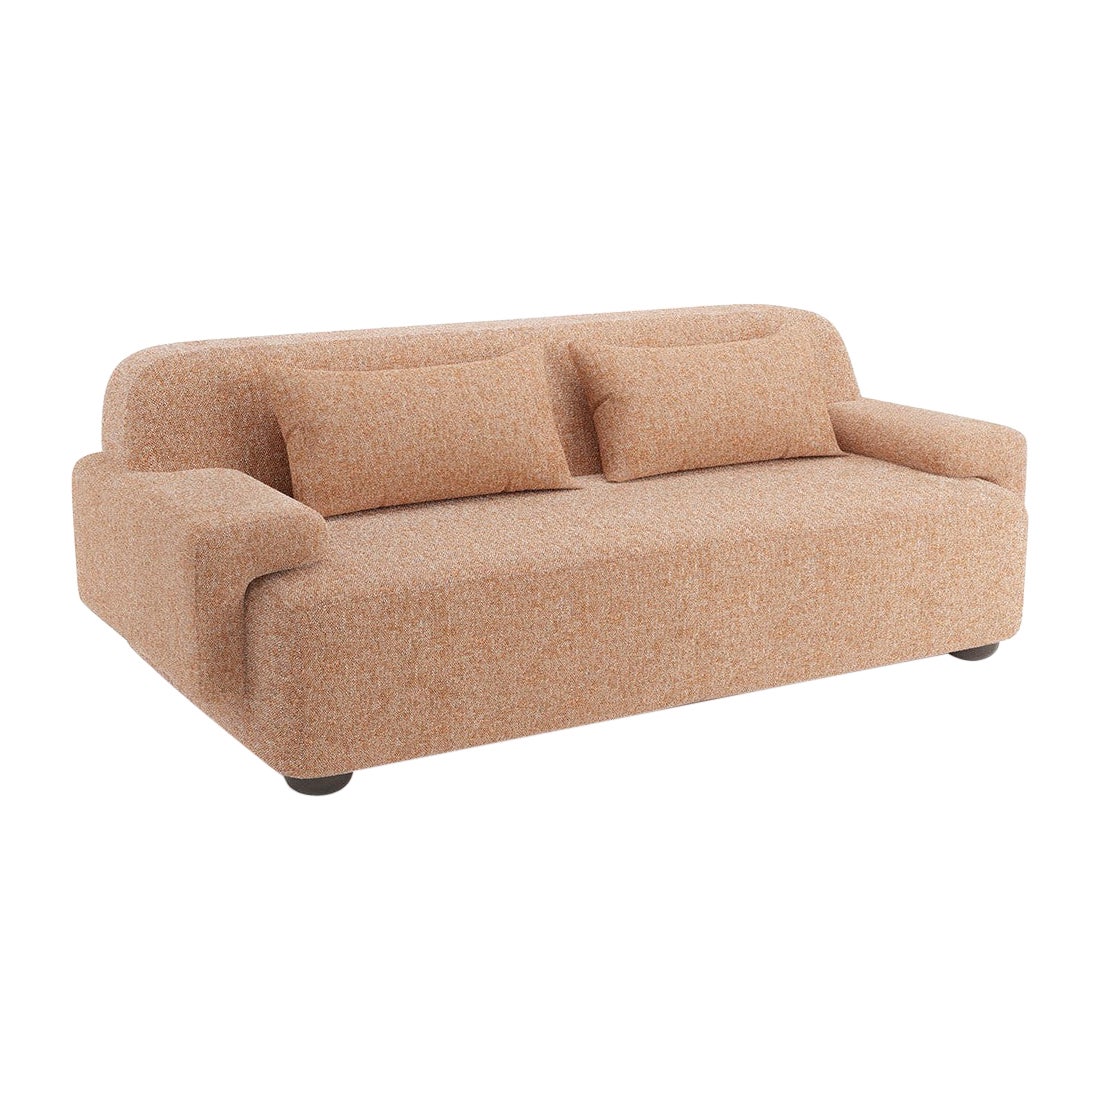 Popus Editions Lena 2.5 Seater Sofa in Terracotta London Linen Fabric For Sale